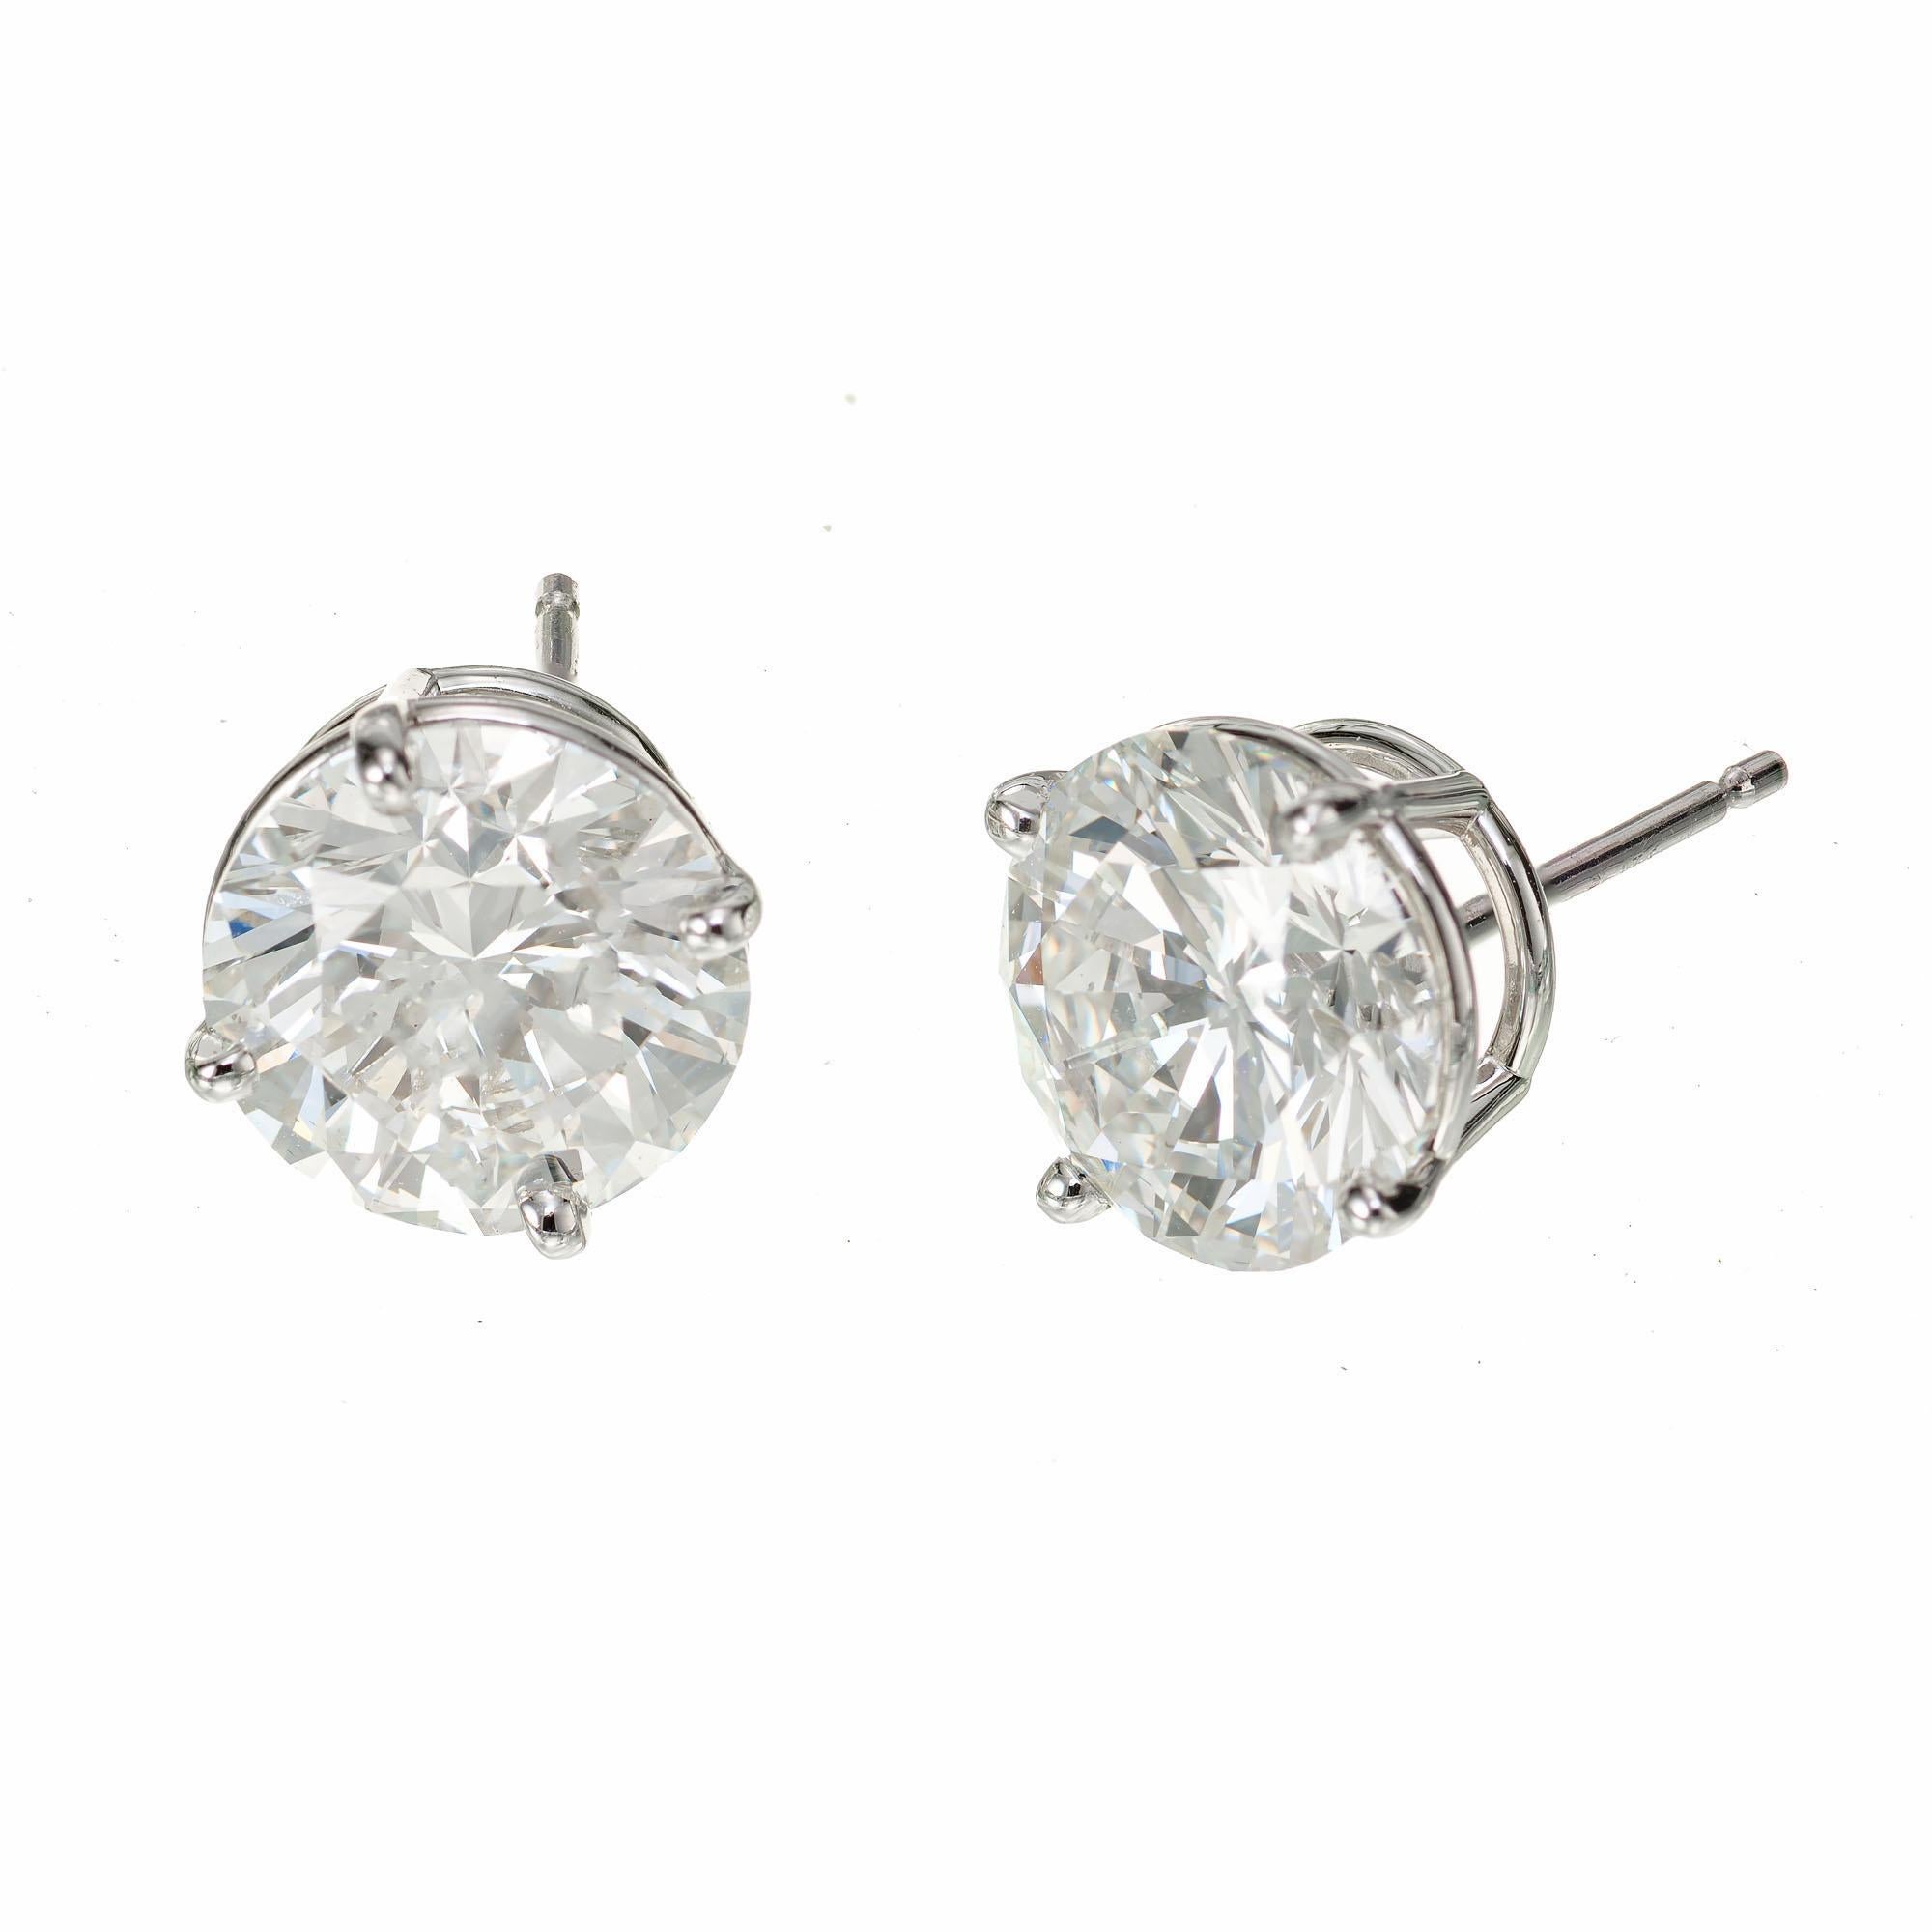 Diamond stud earrings. 2 round brilliant cut diamonds totaling 5.03cts, in platinum basket settings. Well matched and cut. Both diamonds are GIA certified. Designed and crafted in the Peter Suchy workshop.

1 round brilliant cut diamond, I SI